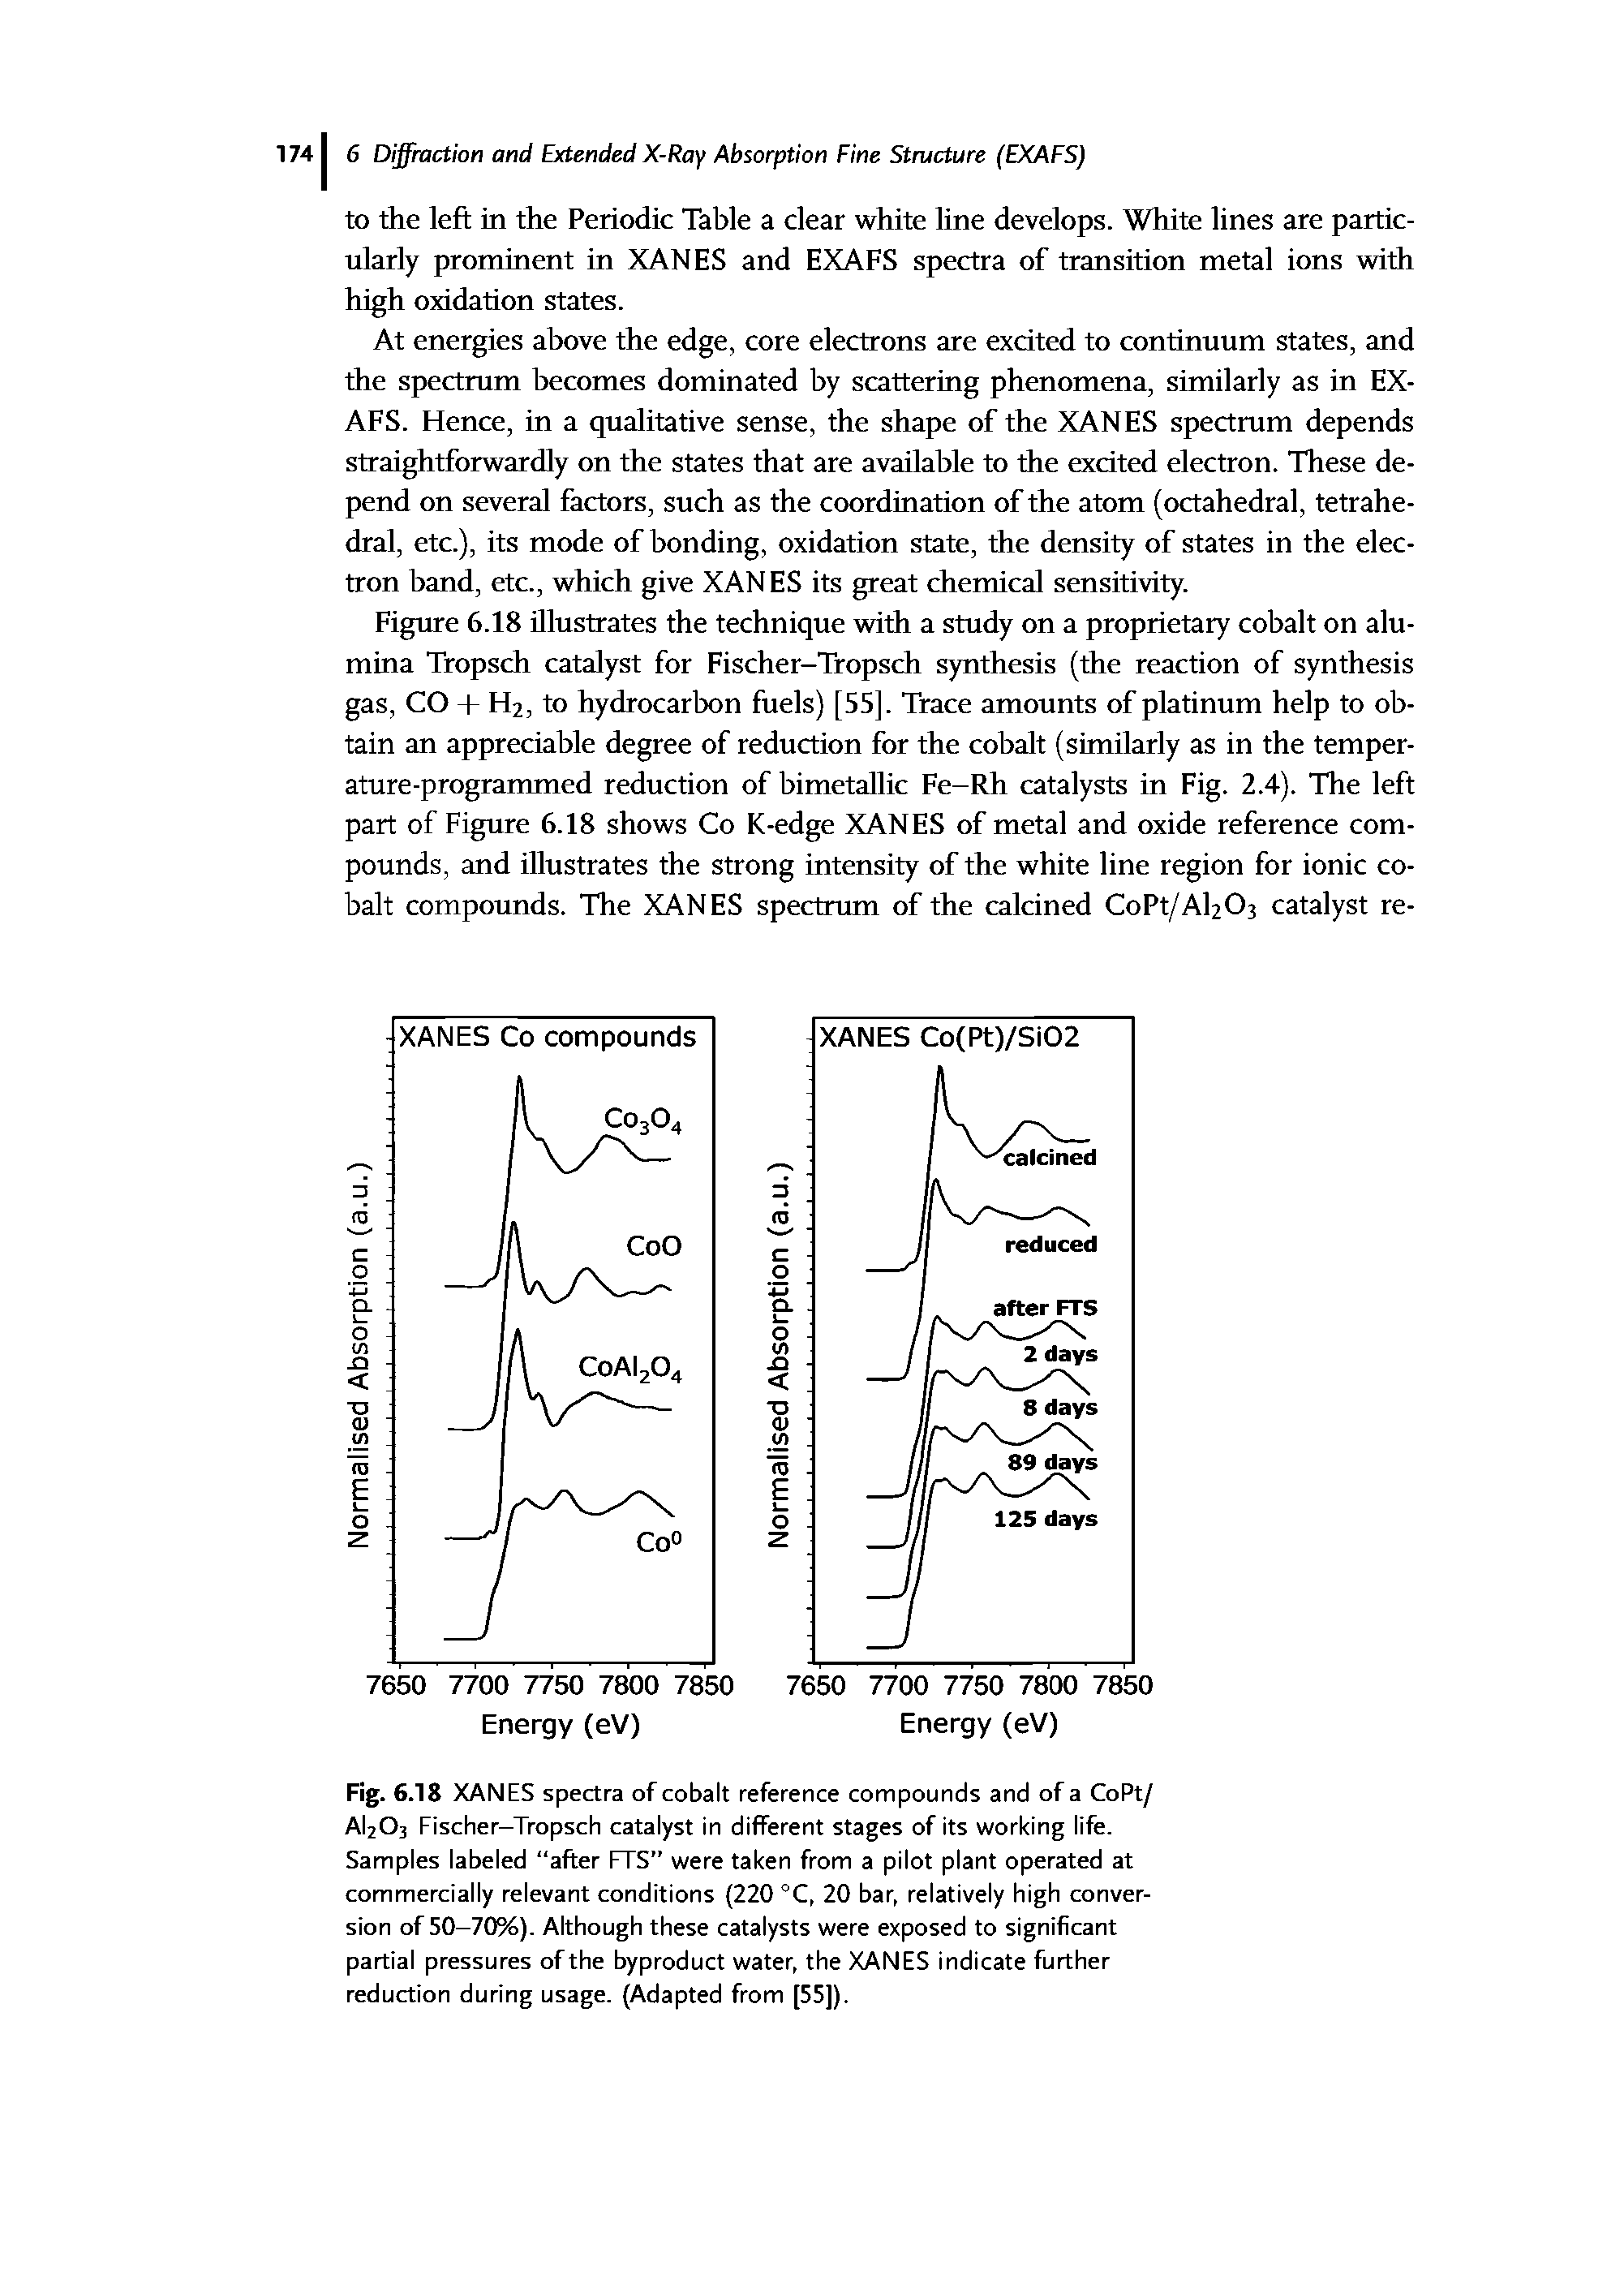 Figure 6.18 illustrates the technique with a study on a proprietary cobalt on alumina Tropsch catalyst for Fischer-Tropsch synthesis (the reaction of synthesis gas, CO + Fl2, to hydrocarbon fuels) [55]. Trace amounts of platinum help to obtain an appreciable degree of reduction for the cobalt (similarly as in the temperature-programmed reduction of bimetallic Fe-Rh catalysts in Fig. 2.4). The left part of Figure 6.18 shows Co K-edge XANES of metal and oxide reference compounds, and illustrates the strong intensity of the white line region for ionic cobalt compounds. The XANES spectrum of the calcined CoPt/A Ch catalyst re-...